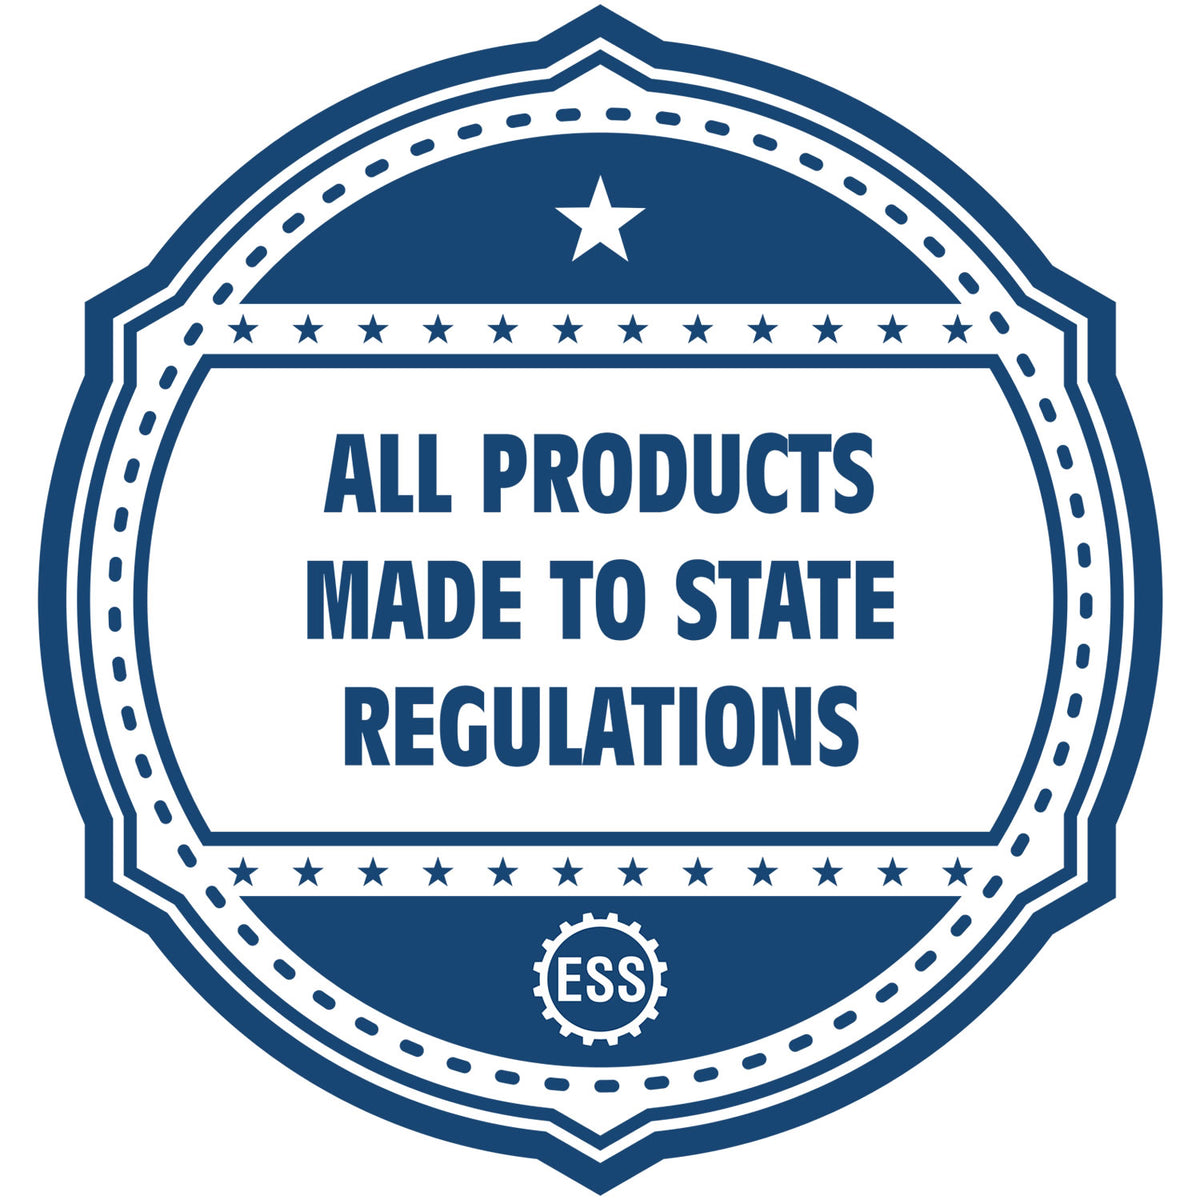 An icon or badge element for the Premium MaxLight Pre-Inked West Virginia Landscape Architectural Stamp showing that this product is made in compliance with state regulations.